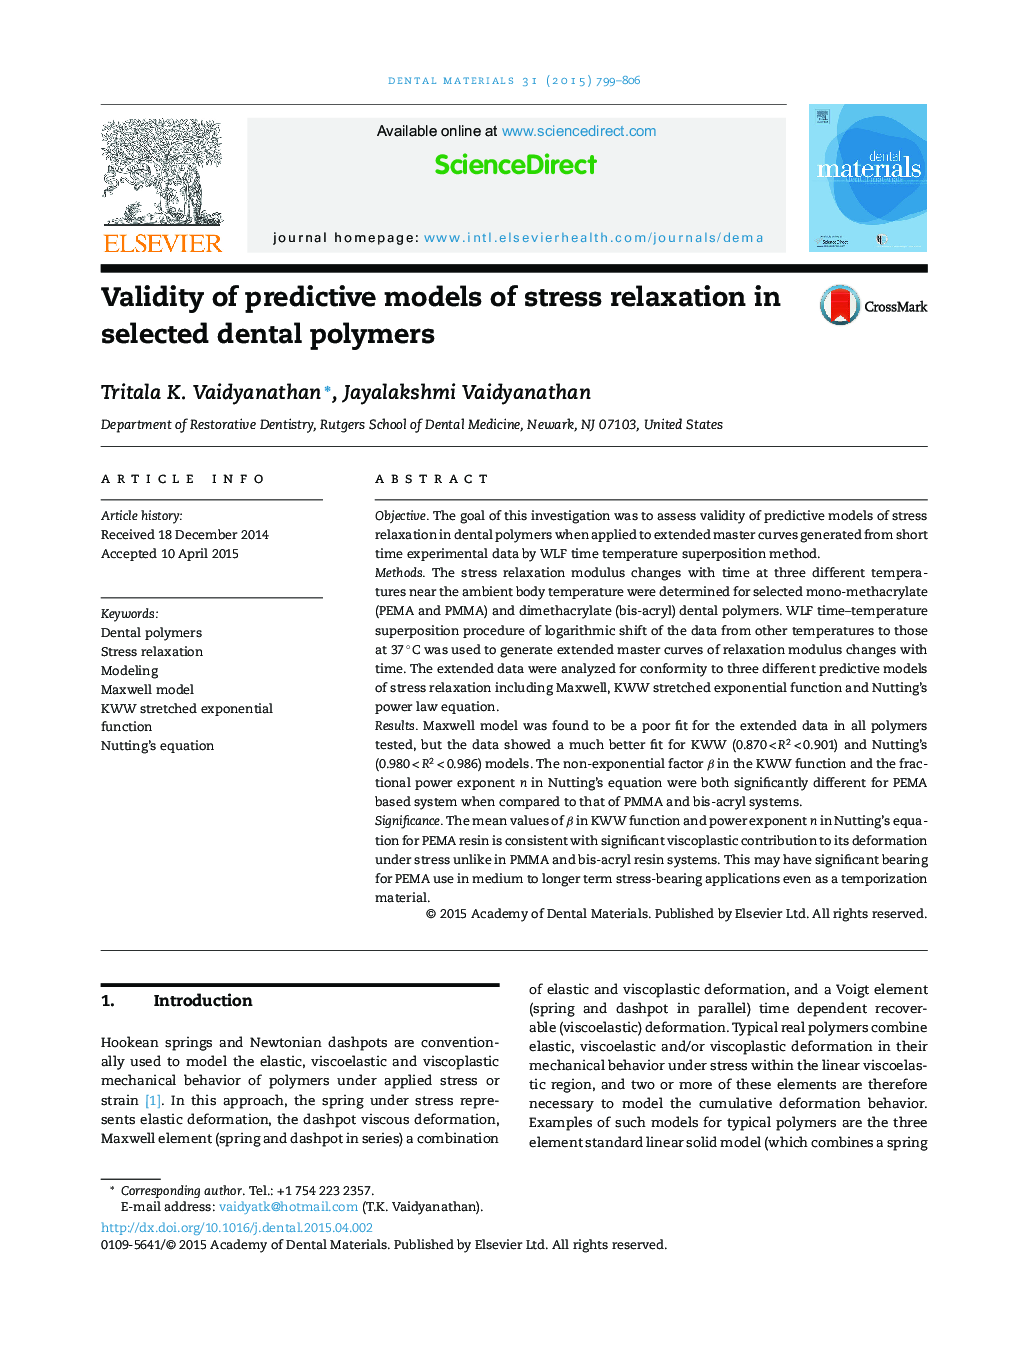 Validity of predictive models of stress relaxation in selected dental polymers